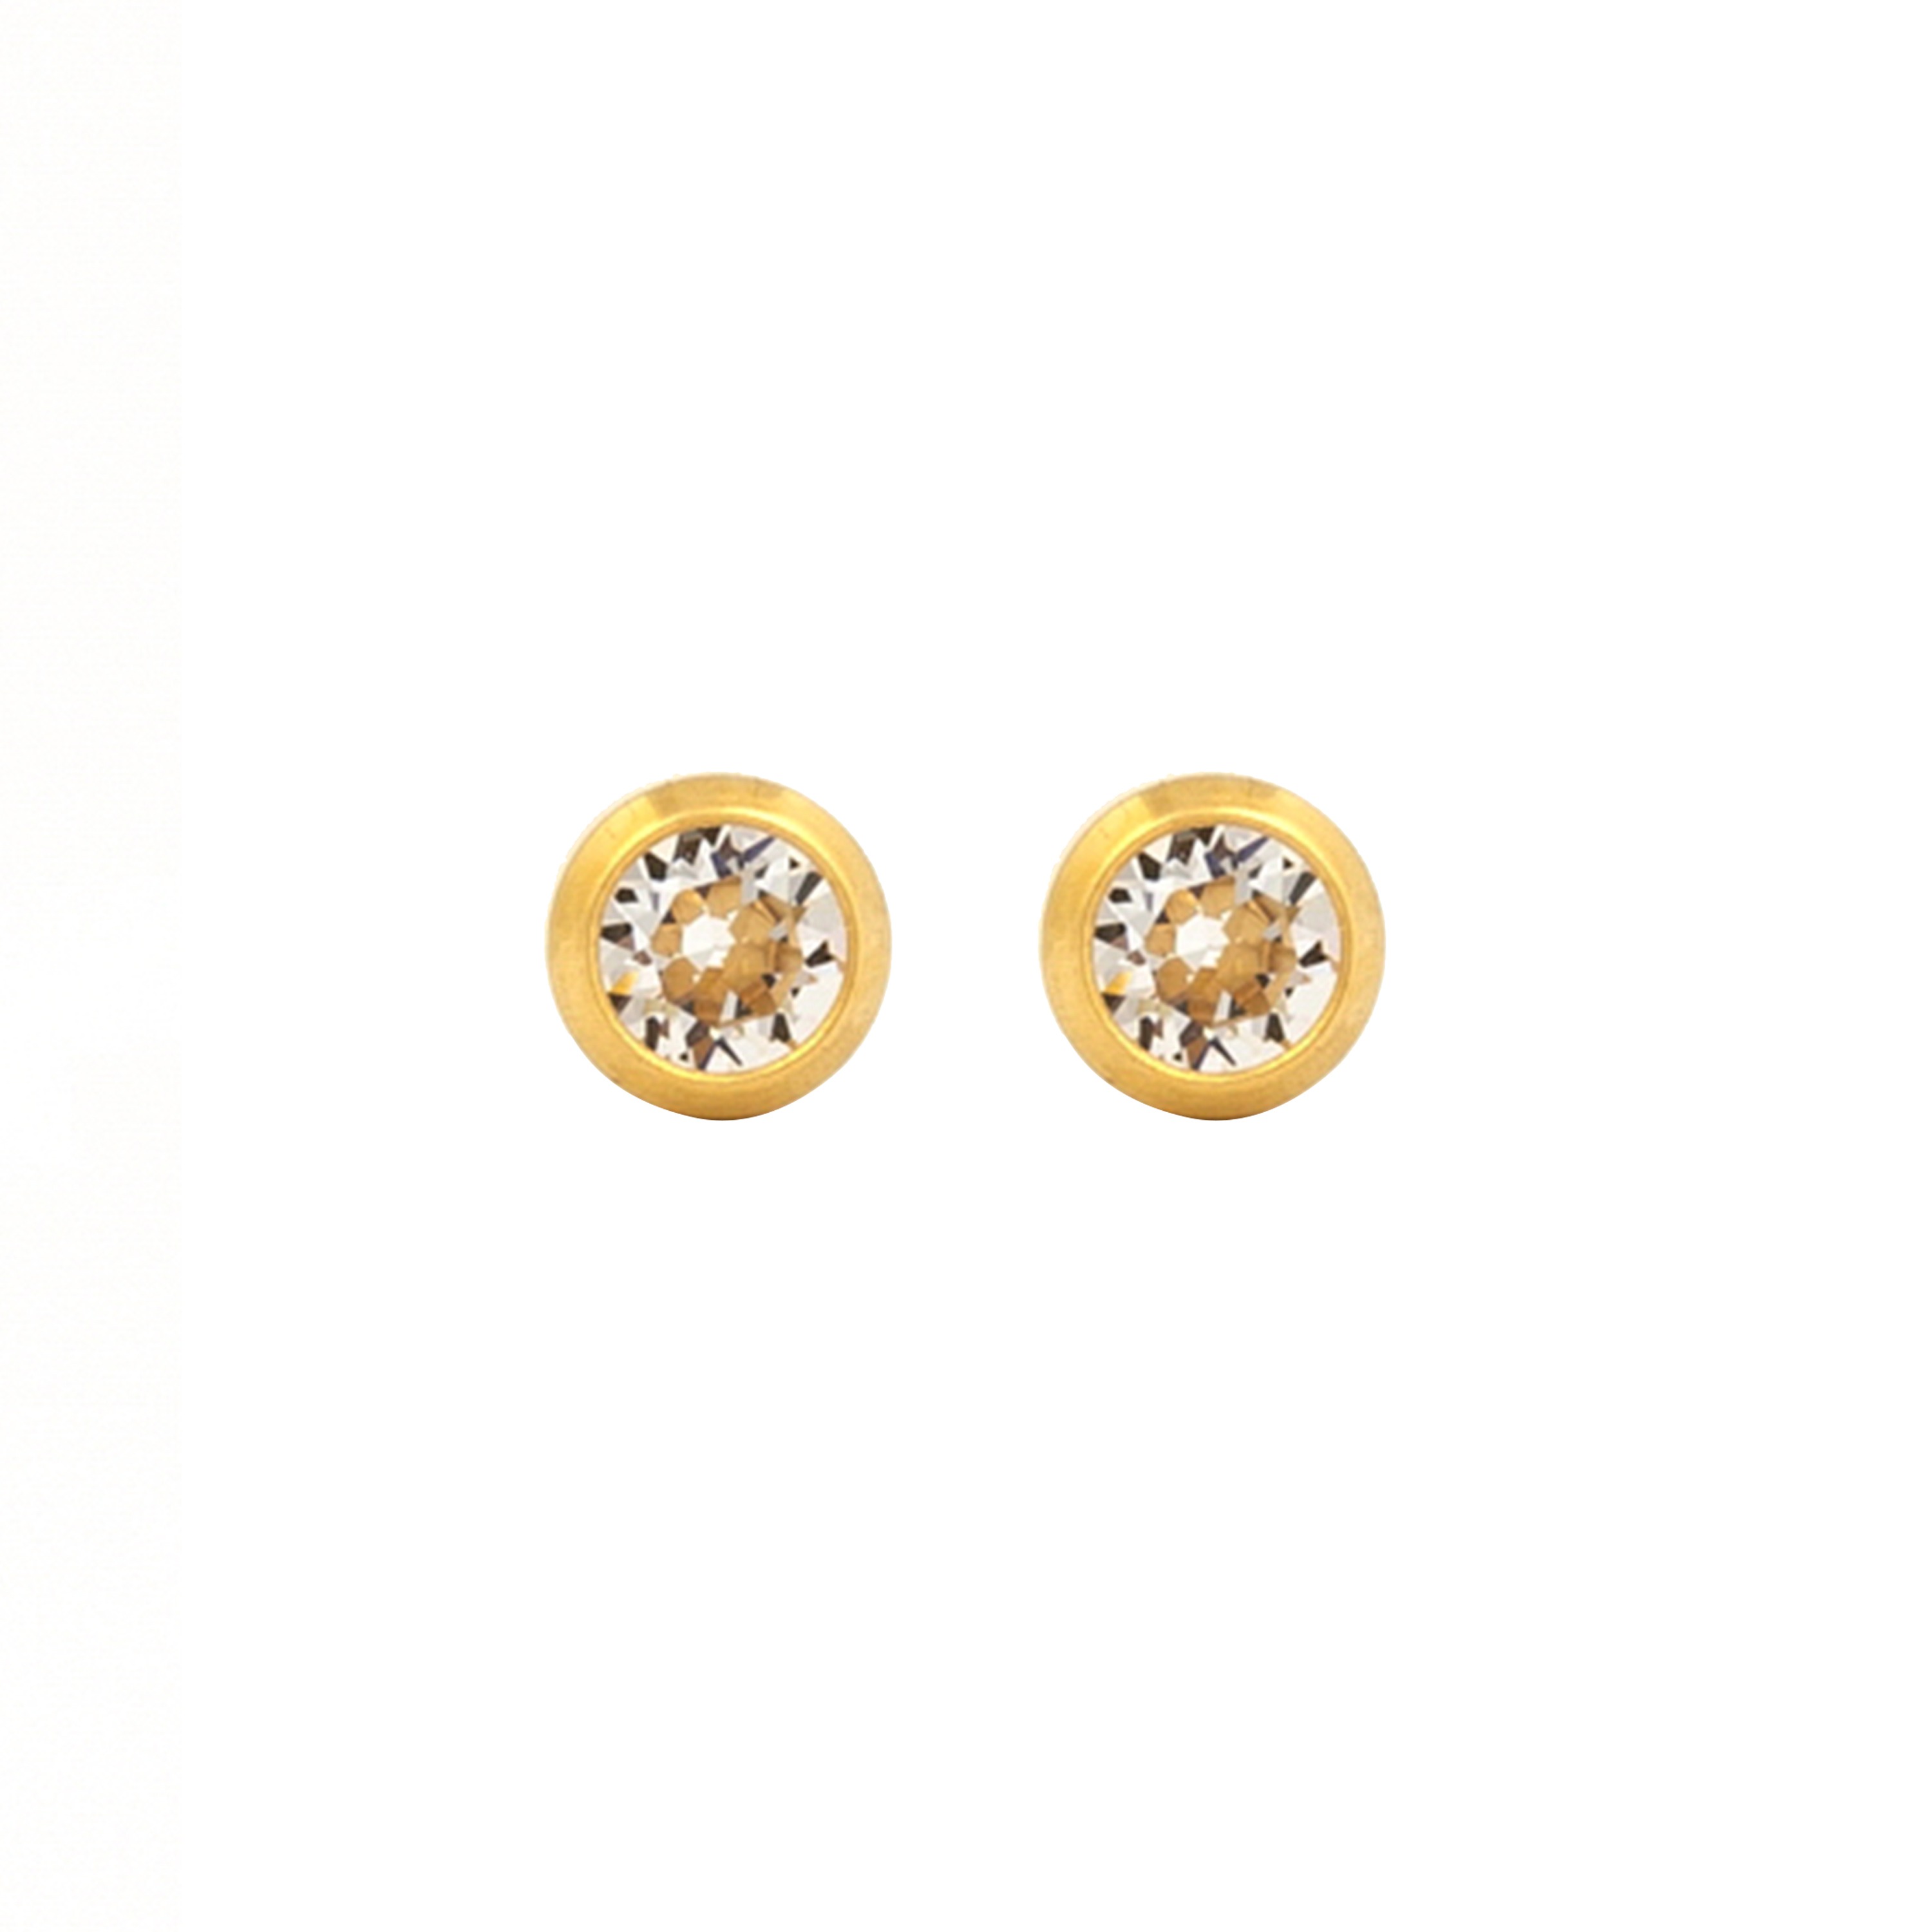 3MM - April Crystal (Round) | 24K Pure Gold Plated Piercing Earrings with Ear Piercing Cartridge | Studex System75